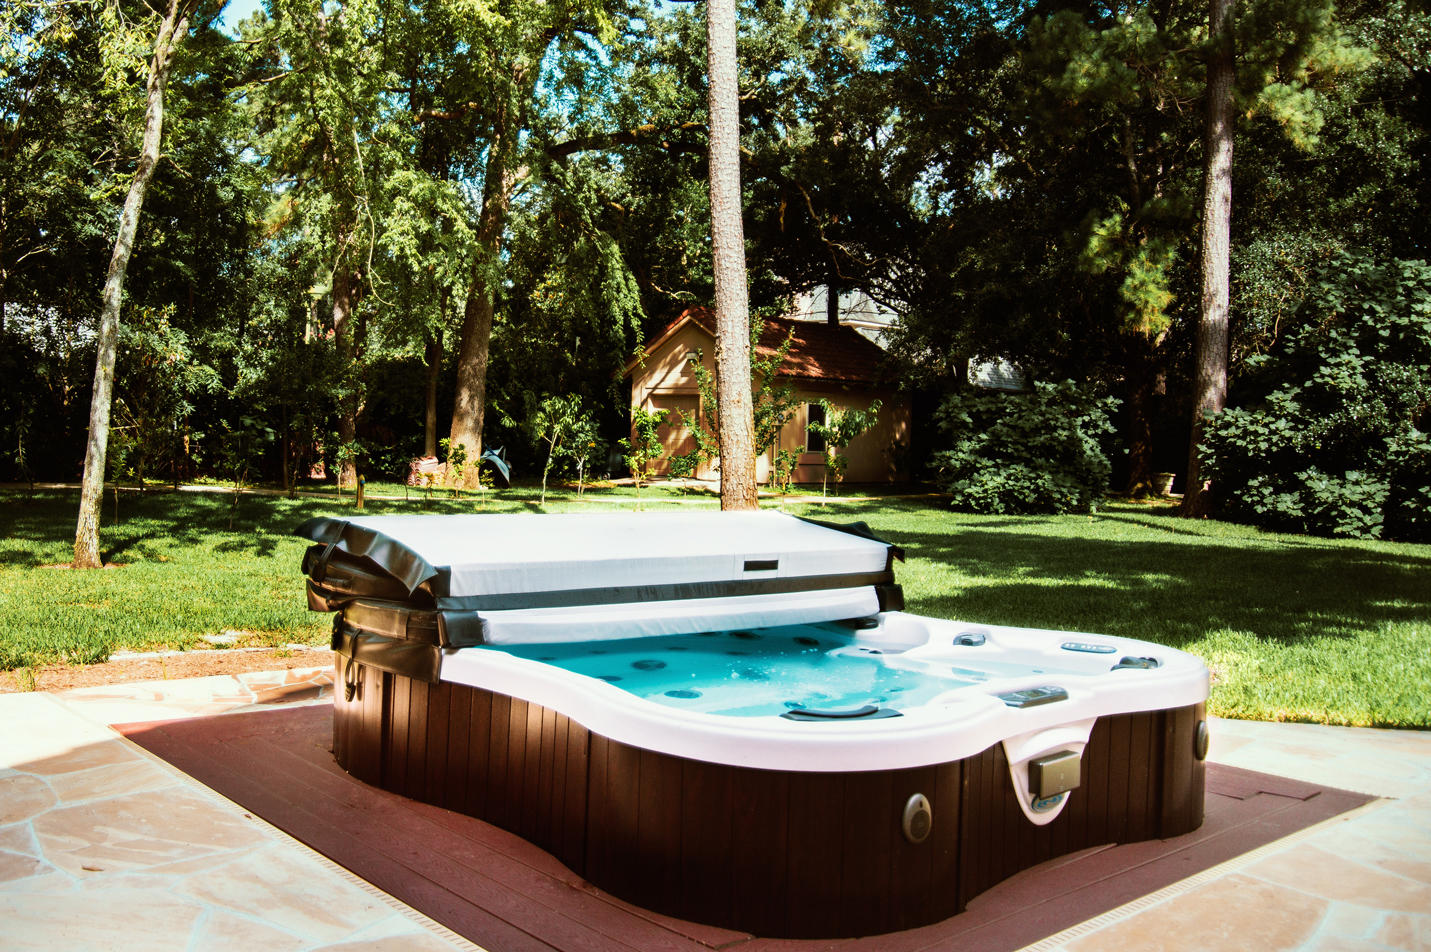 Vaulted D1 Amore Bay hot tub.